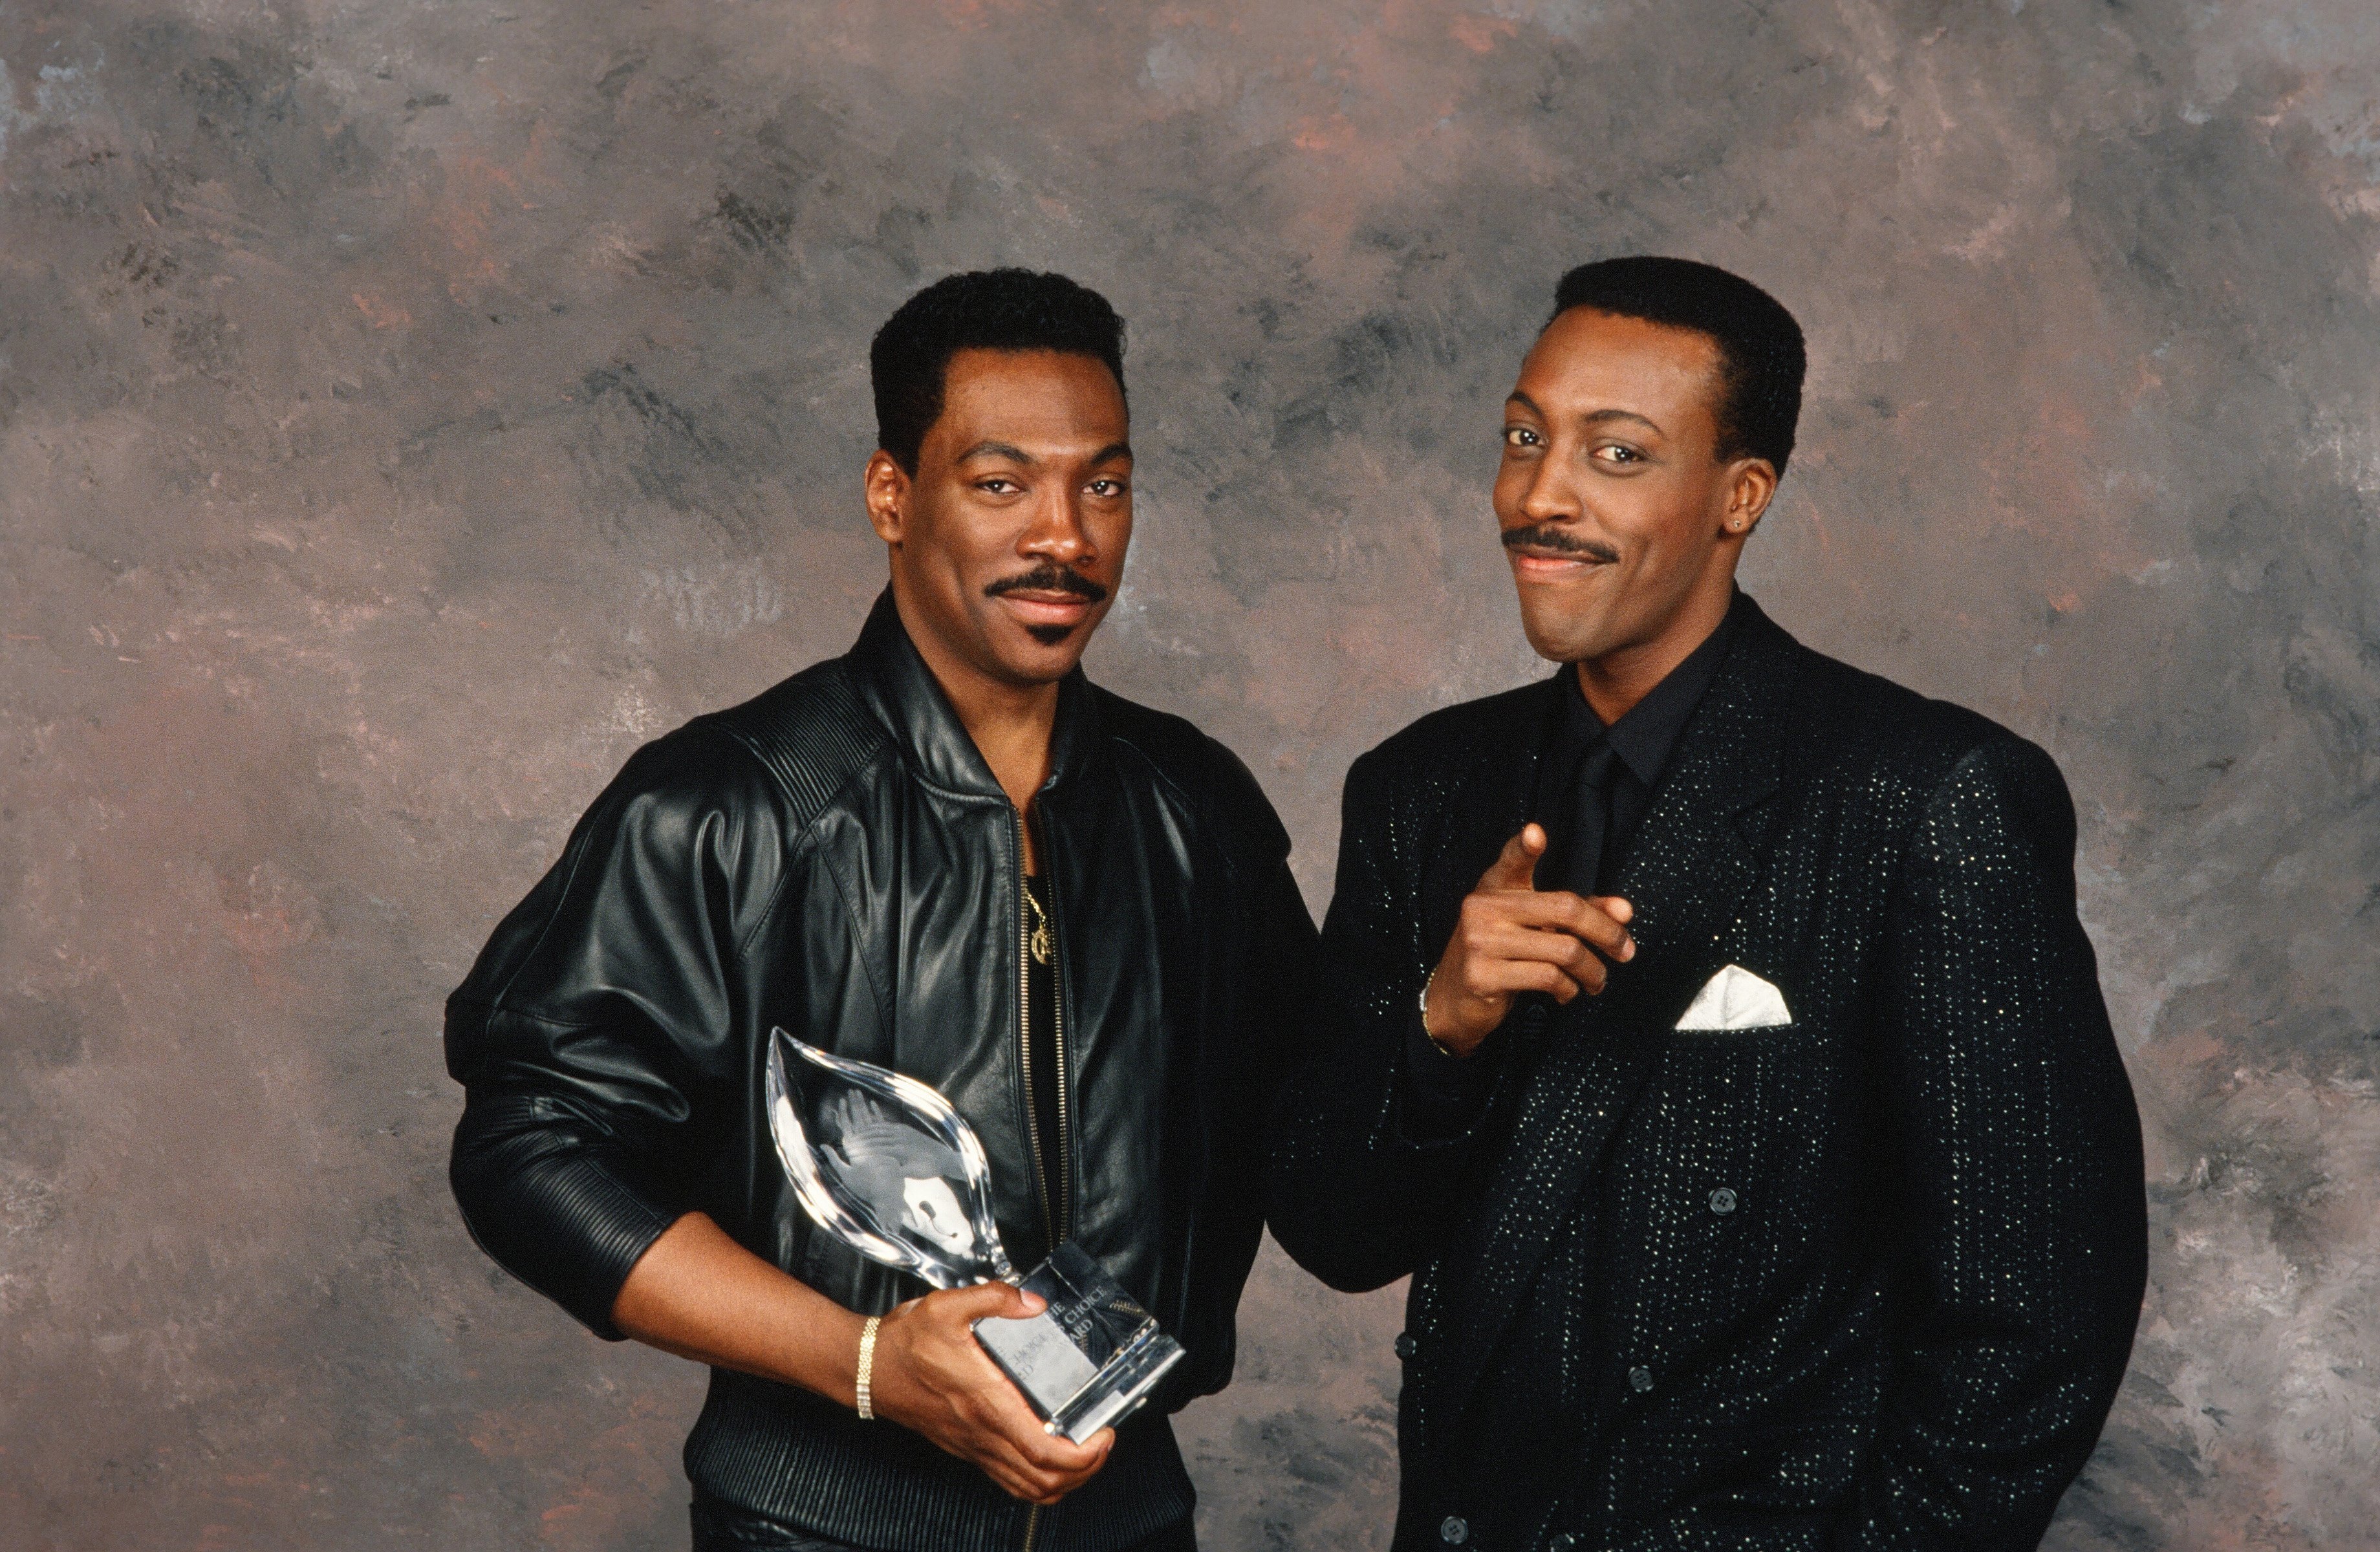 Eddie Murphy and Spike Lee in Conversation: Our 1990 Cover Story